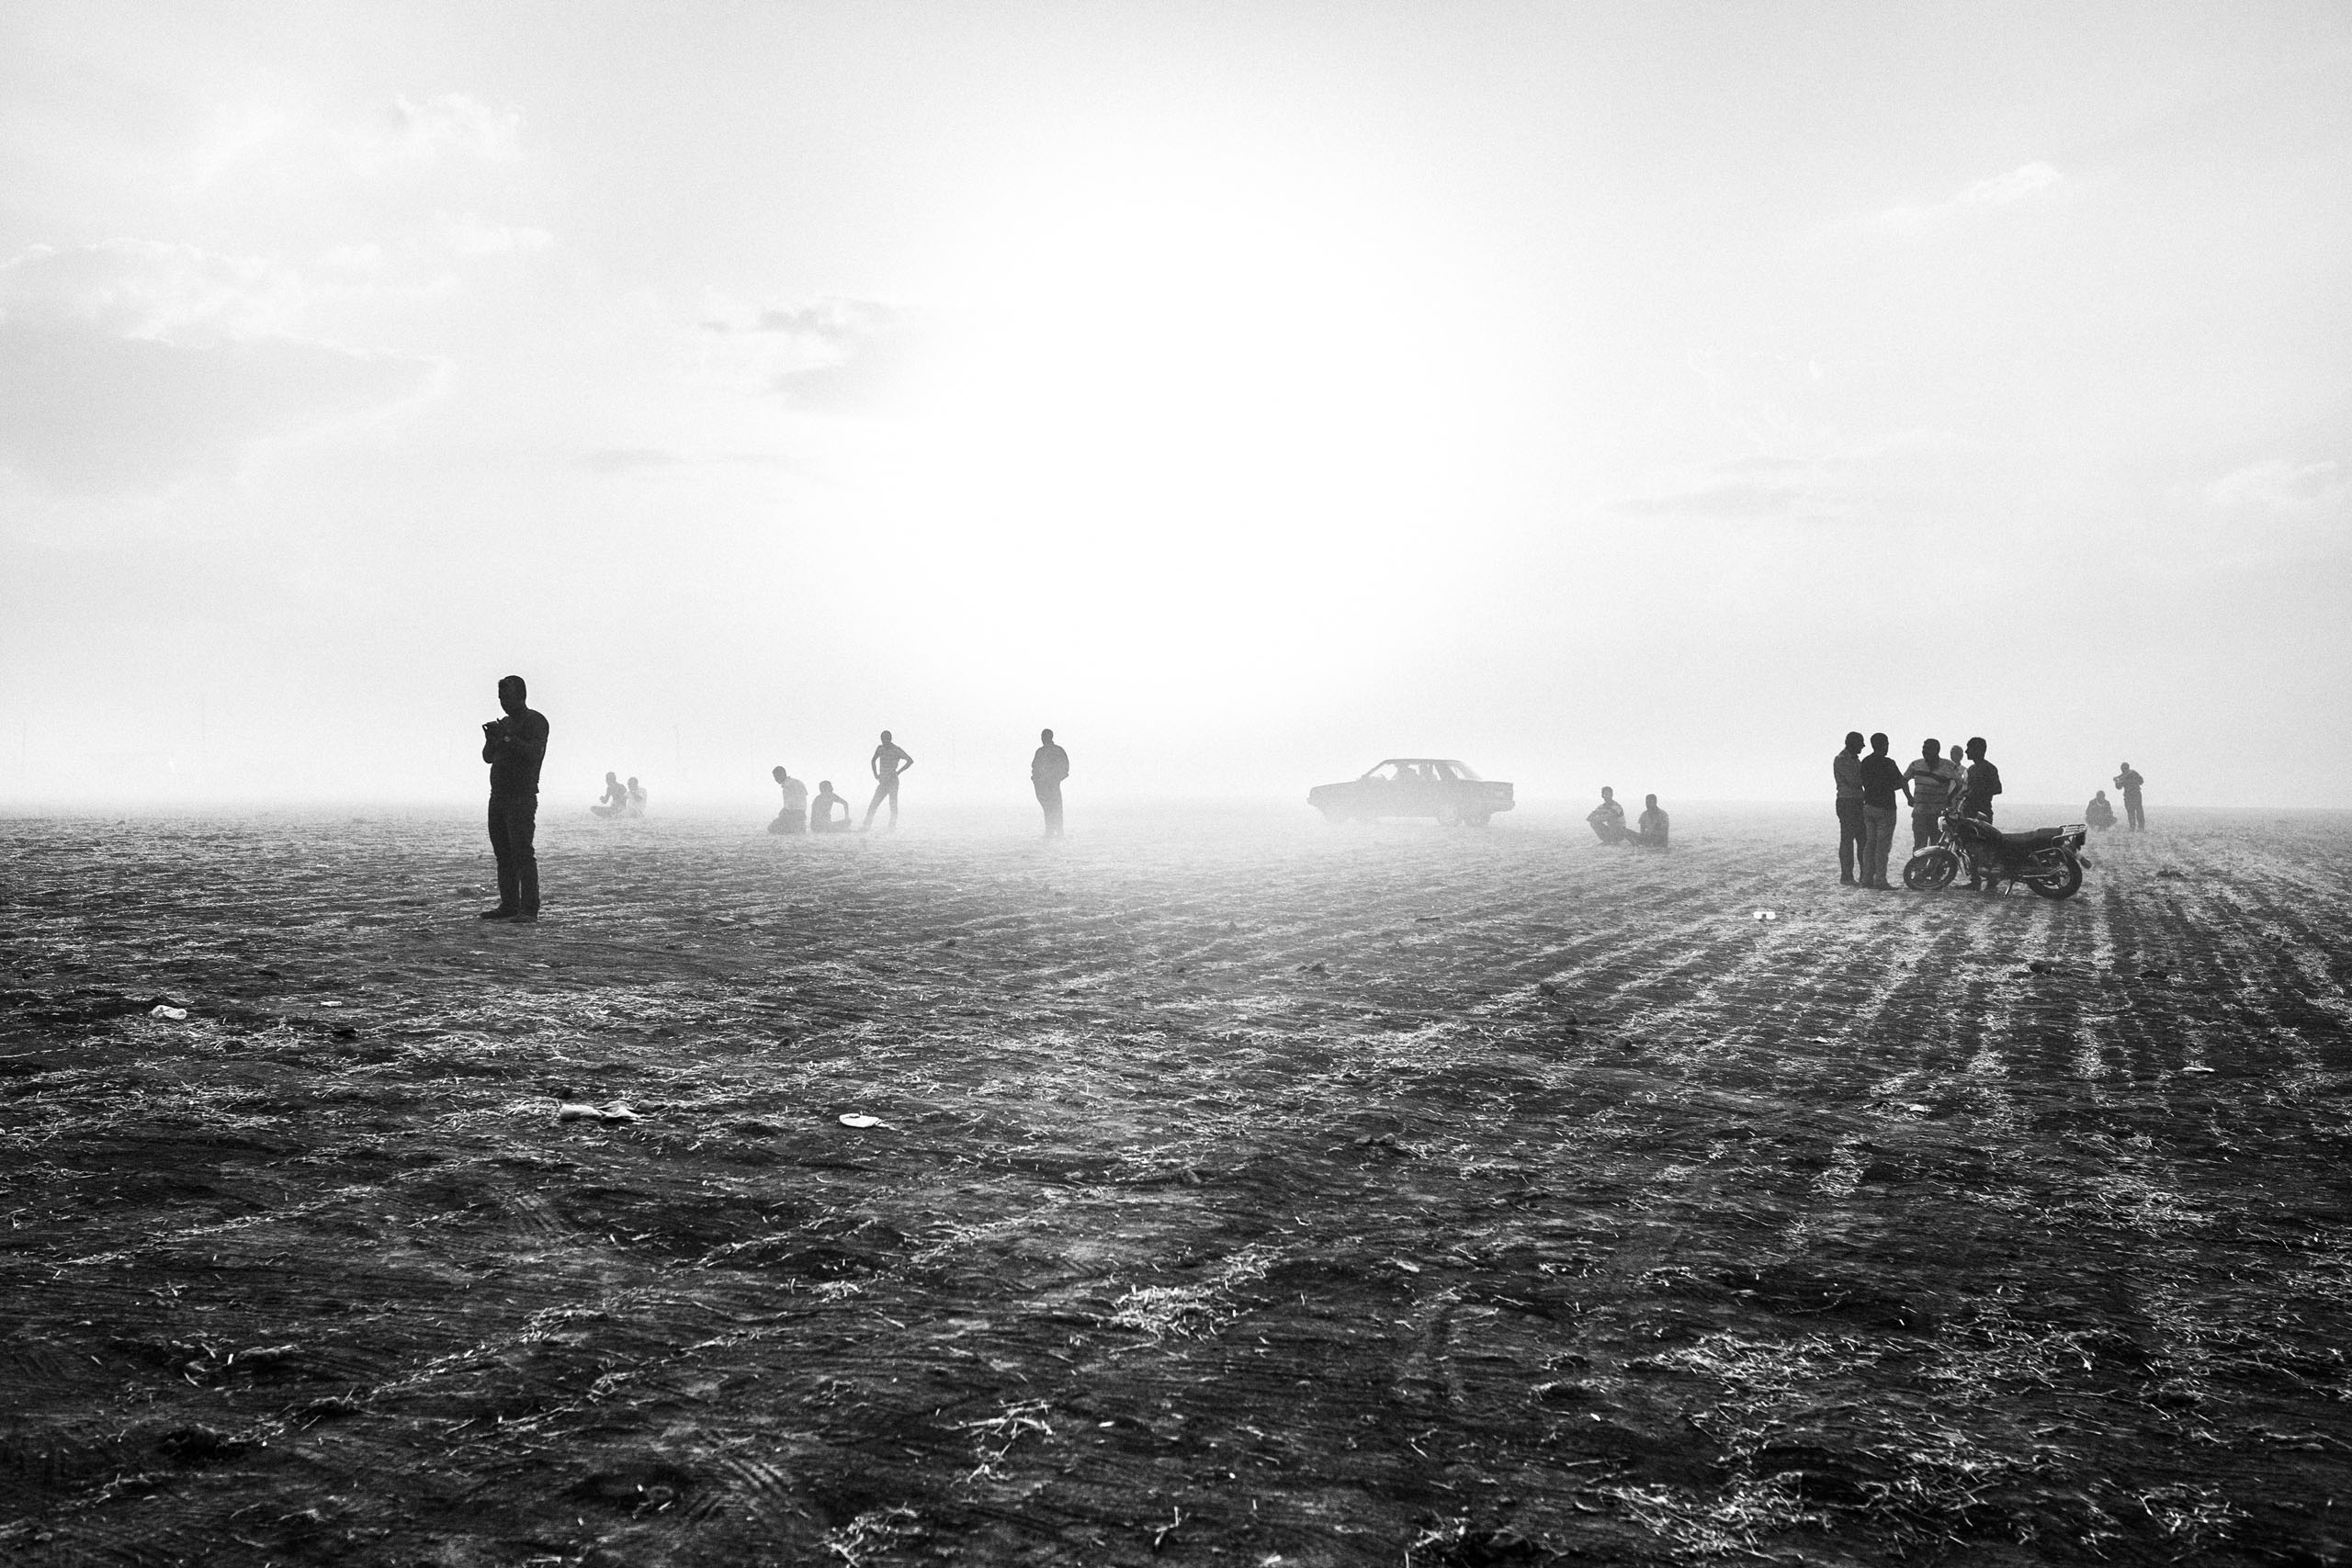 Kurdish Syrian refugees from Kobani, Syria wait near the Turkish-Syrian border, Sept. 2014, as the Islamic State of Iraq and Levant (ISIS/ISIL) began an attack on the city, eventually overtaking it in Oct. 2014. Children and elderly crossed mine fields separating Kobani from the Turkish border, in an effort to flee the fighting. According to UNHCR, 170,000 inhabitants of Kobani took refuge in the camps in Turkey.